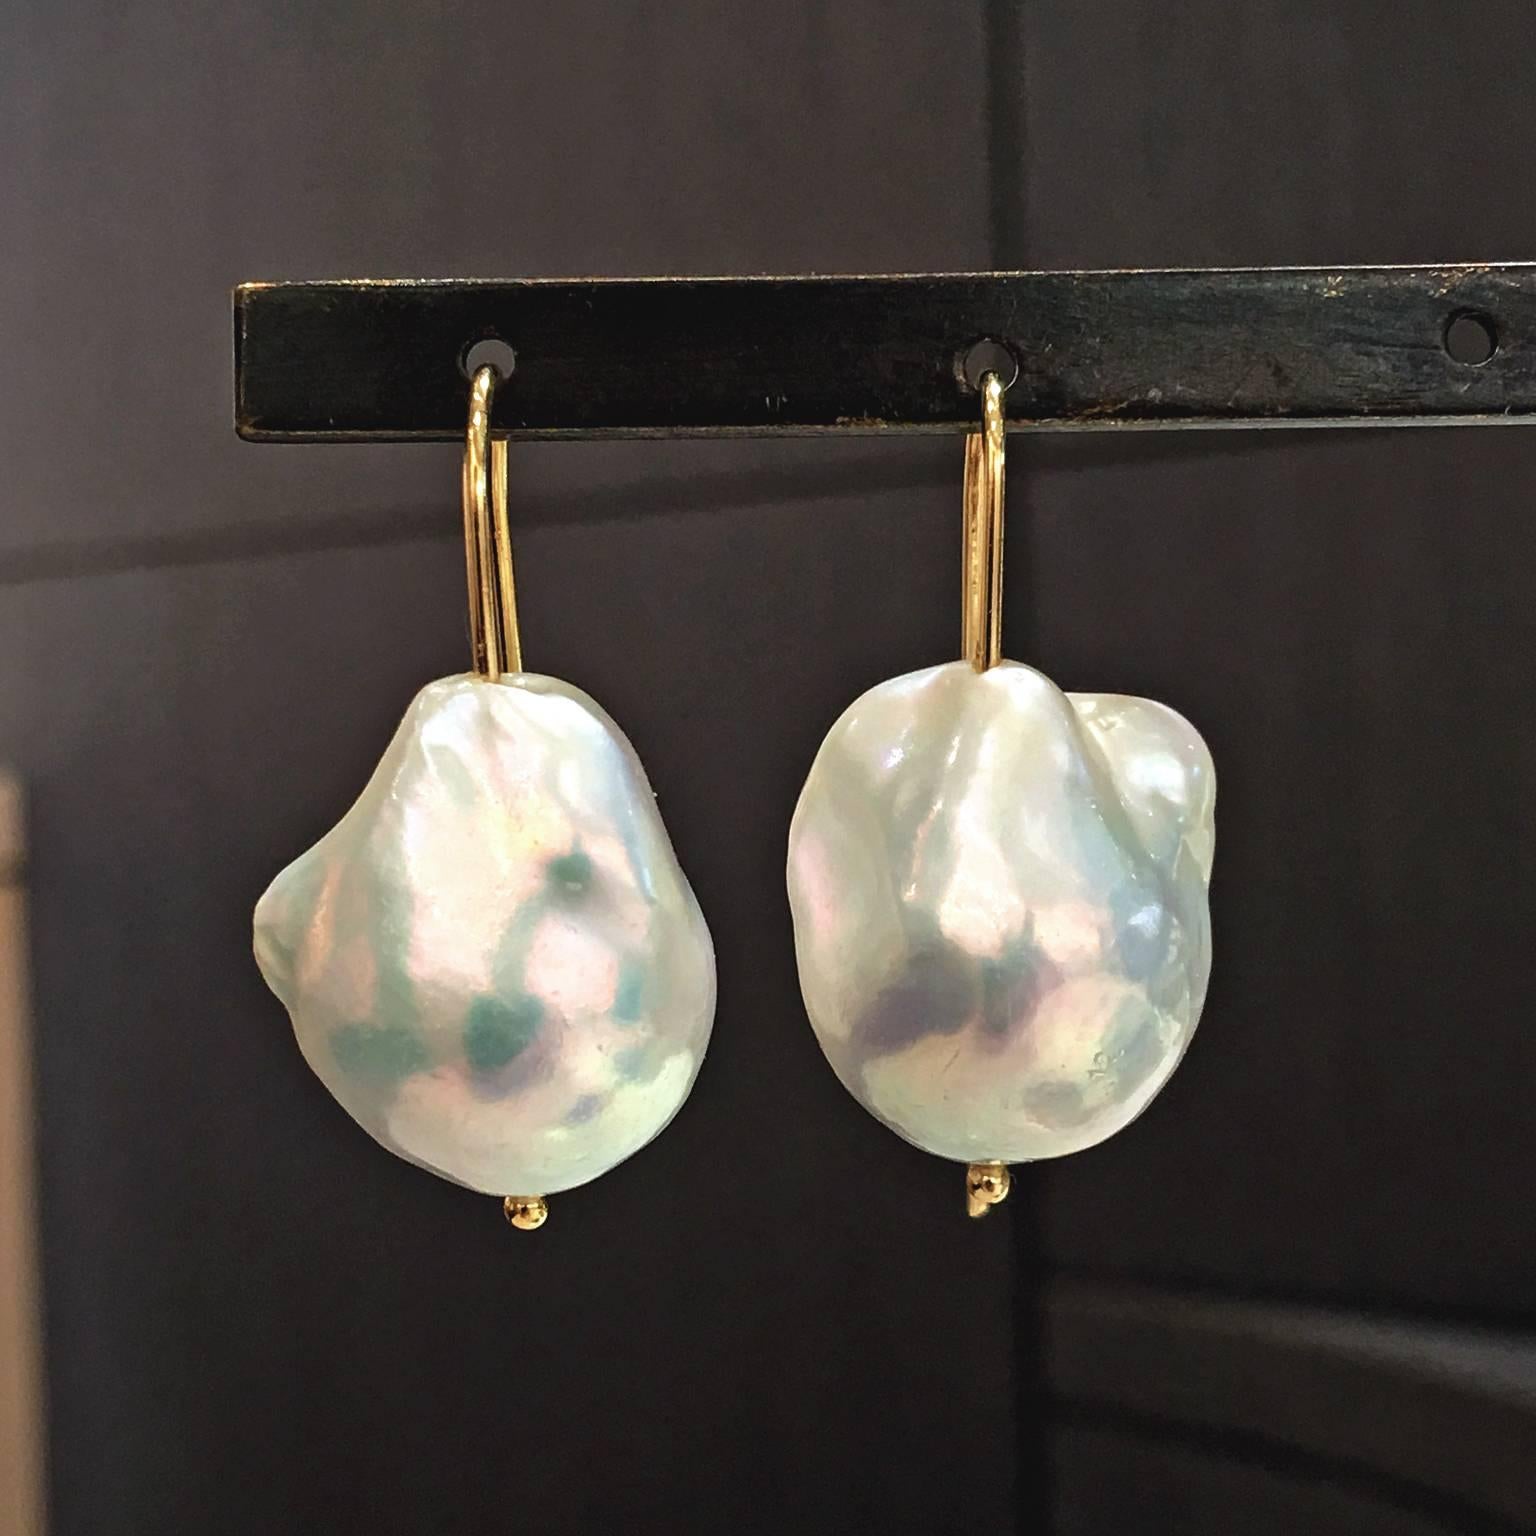 Freshwater Baroque Pearl Drop Earrings by jewelry artist Russell Trusso on handmade 18k yellow gold wires showcasing a pair of colorful, lustrous white freshwater baroque pearls. 